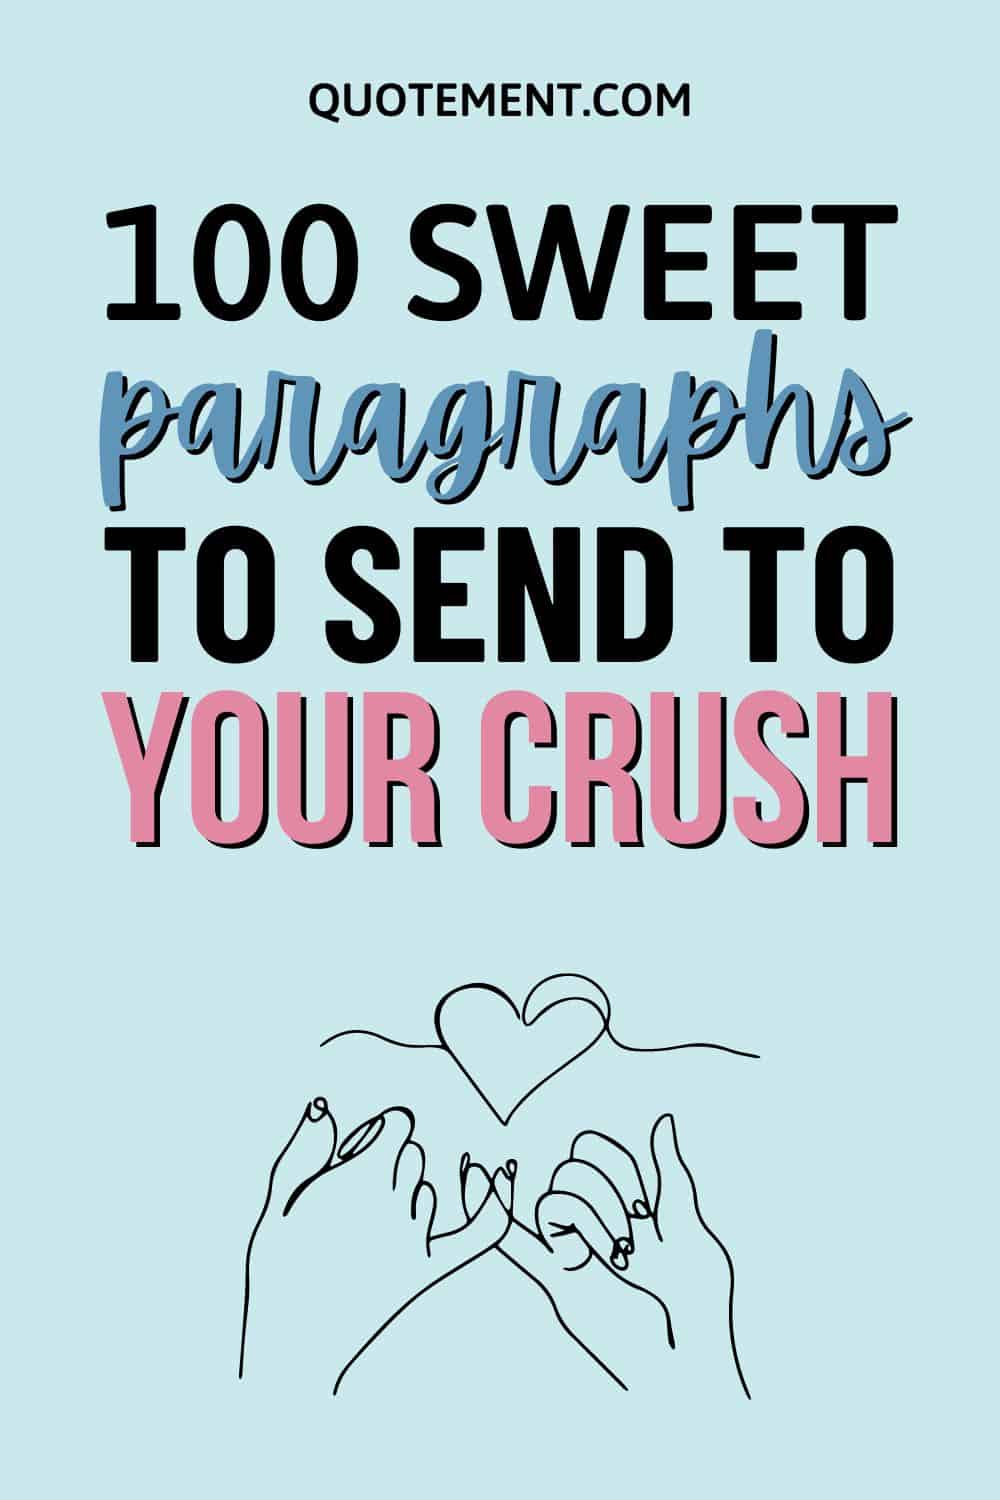 100 Heart Melting Love Paragraphs To Send To Your Crush!